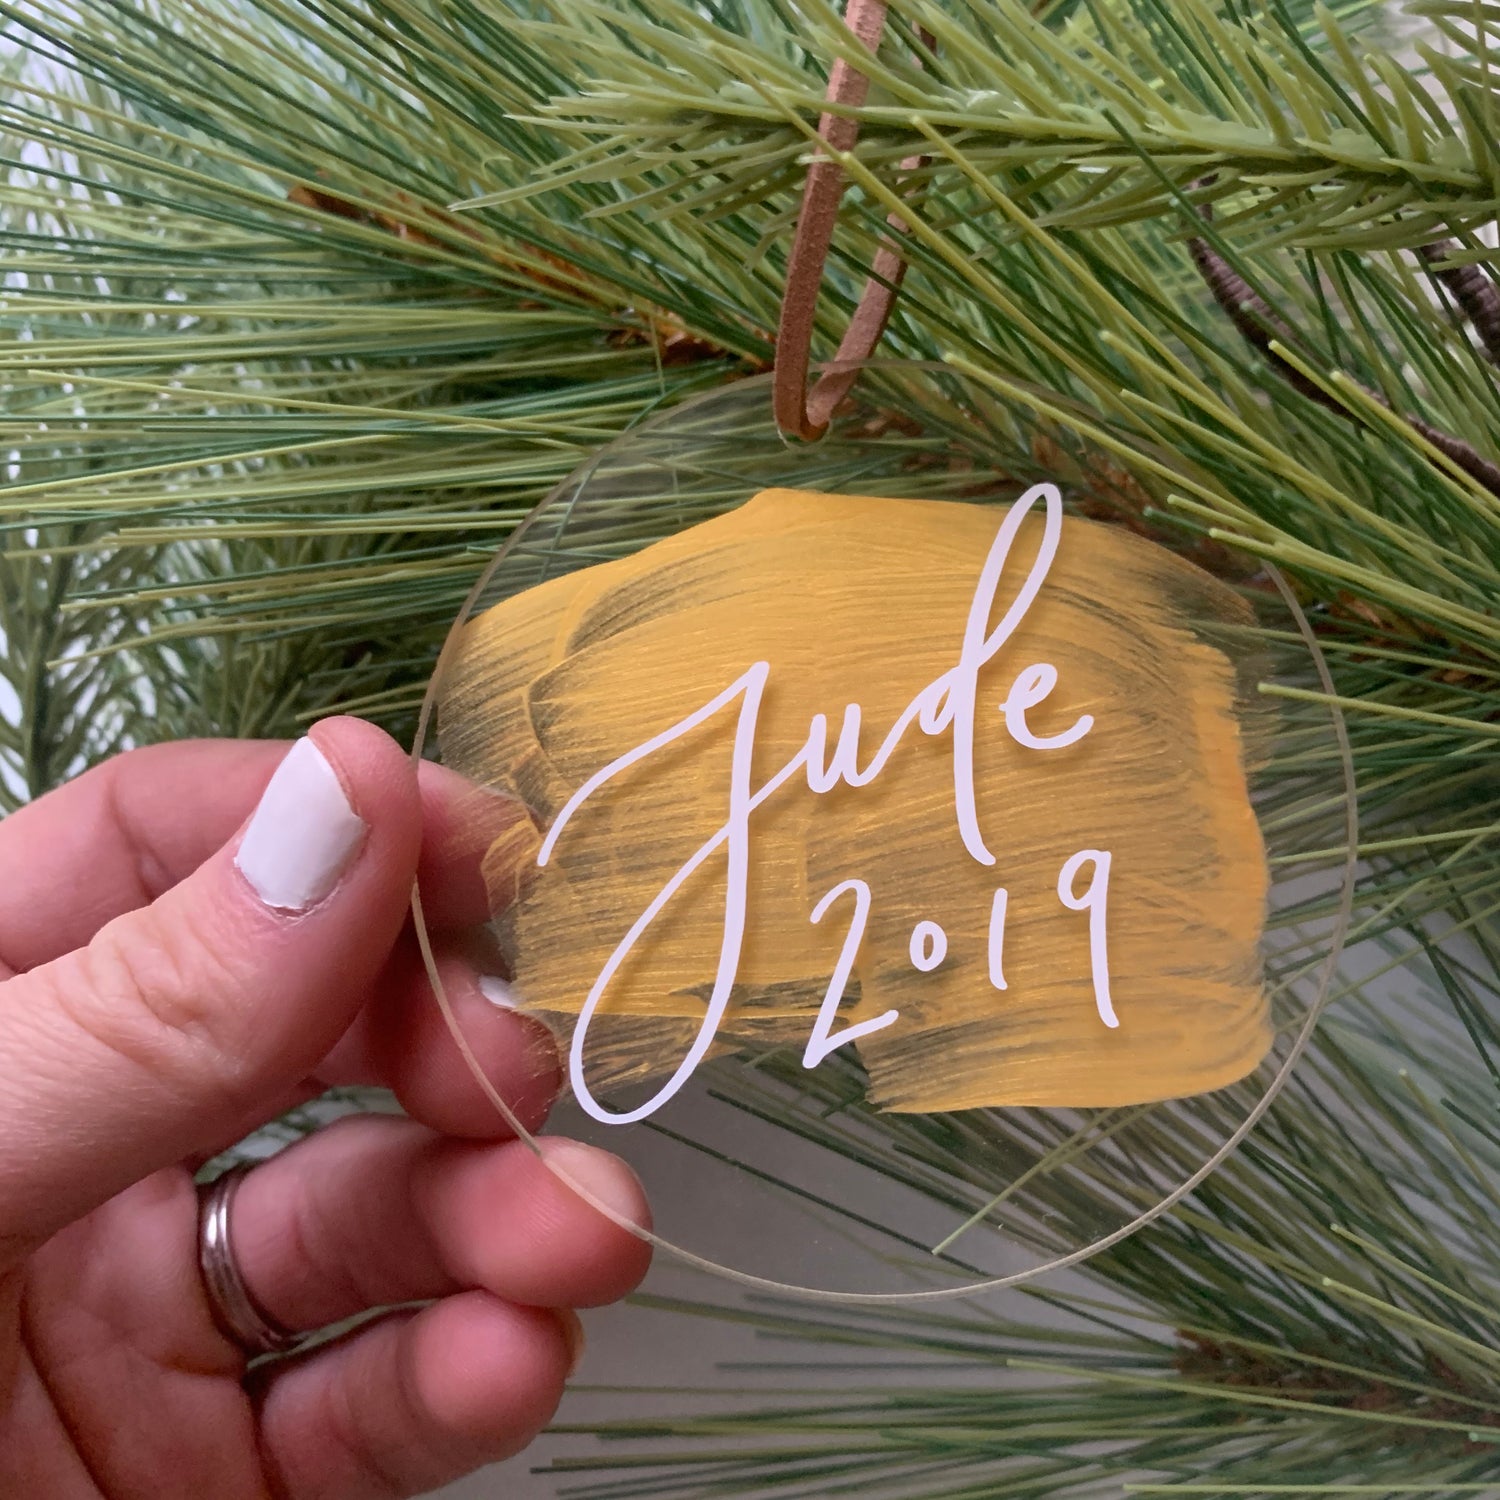 Personalized Acrylic Ornament